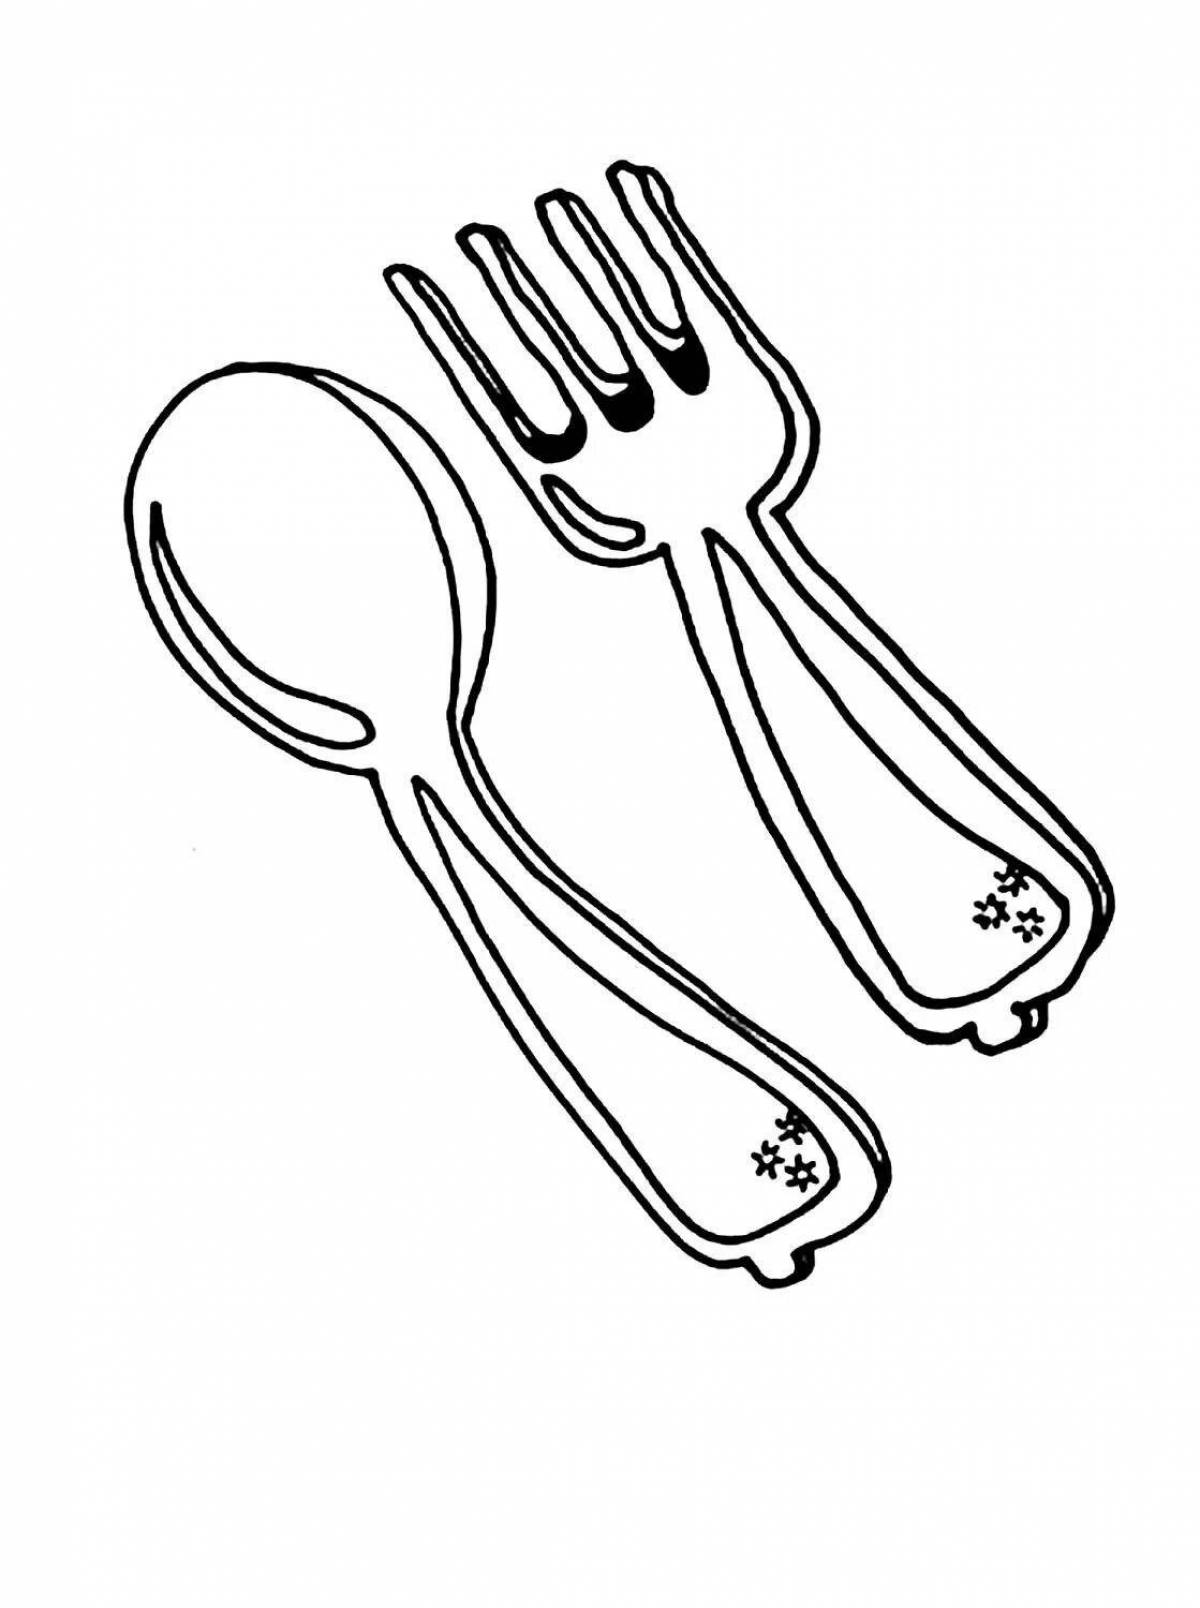 Fascinating cutlery coloring for students